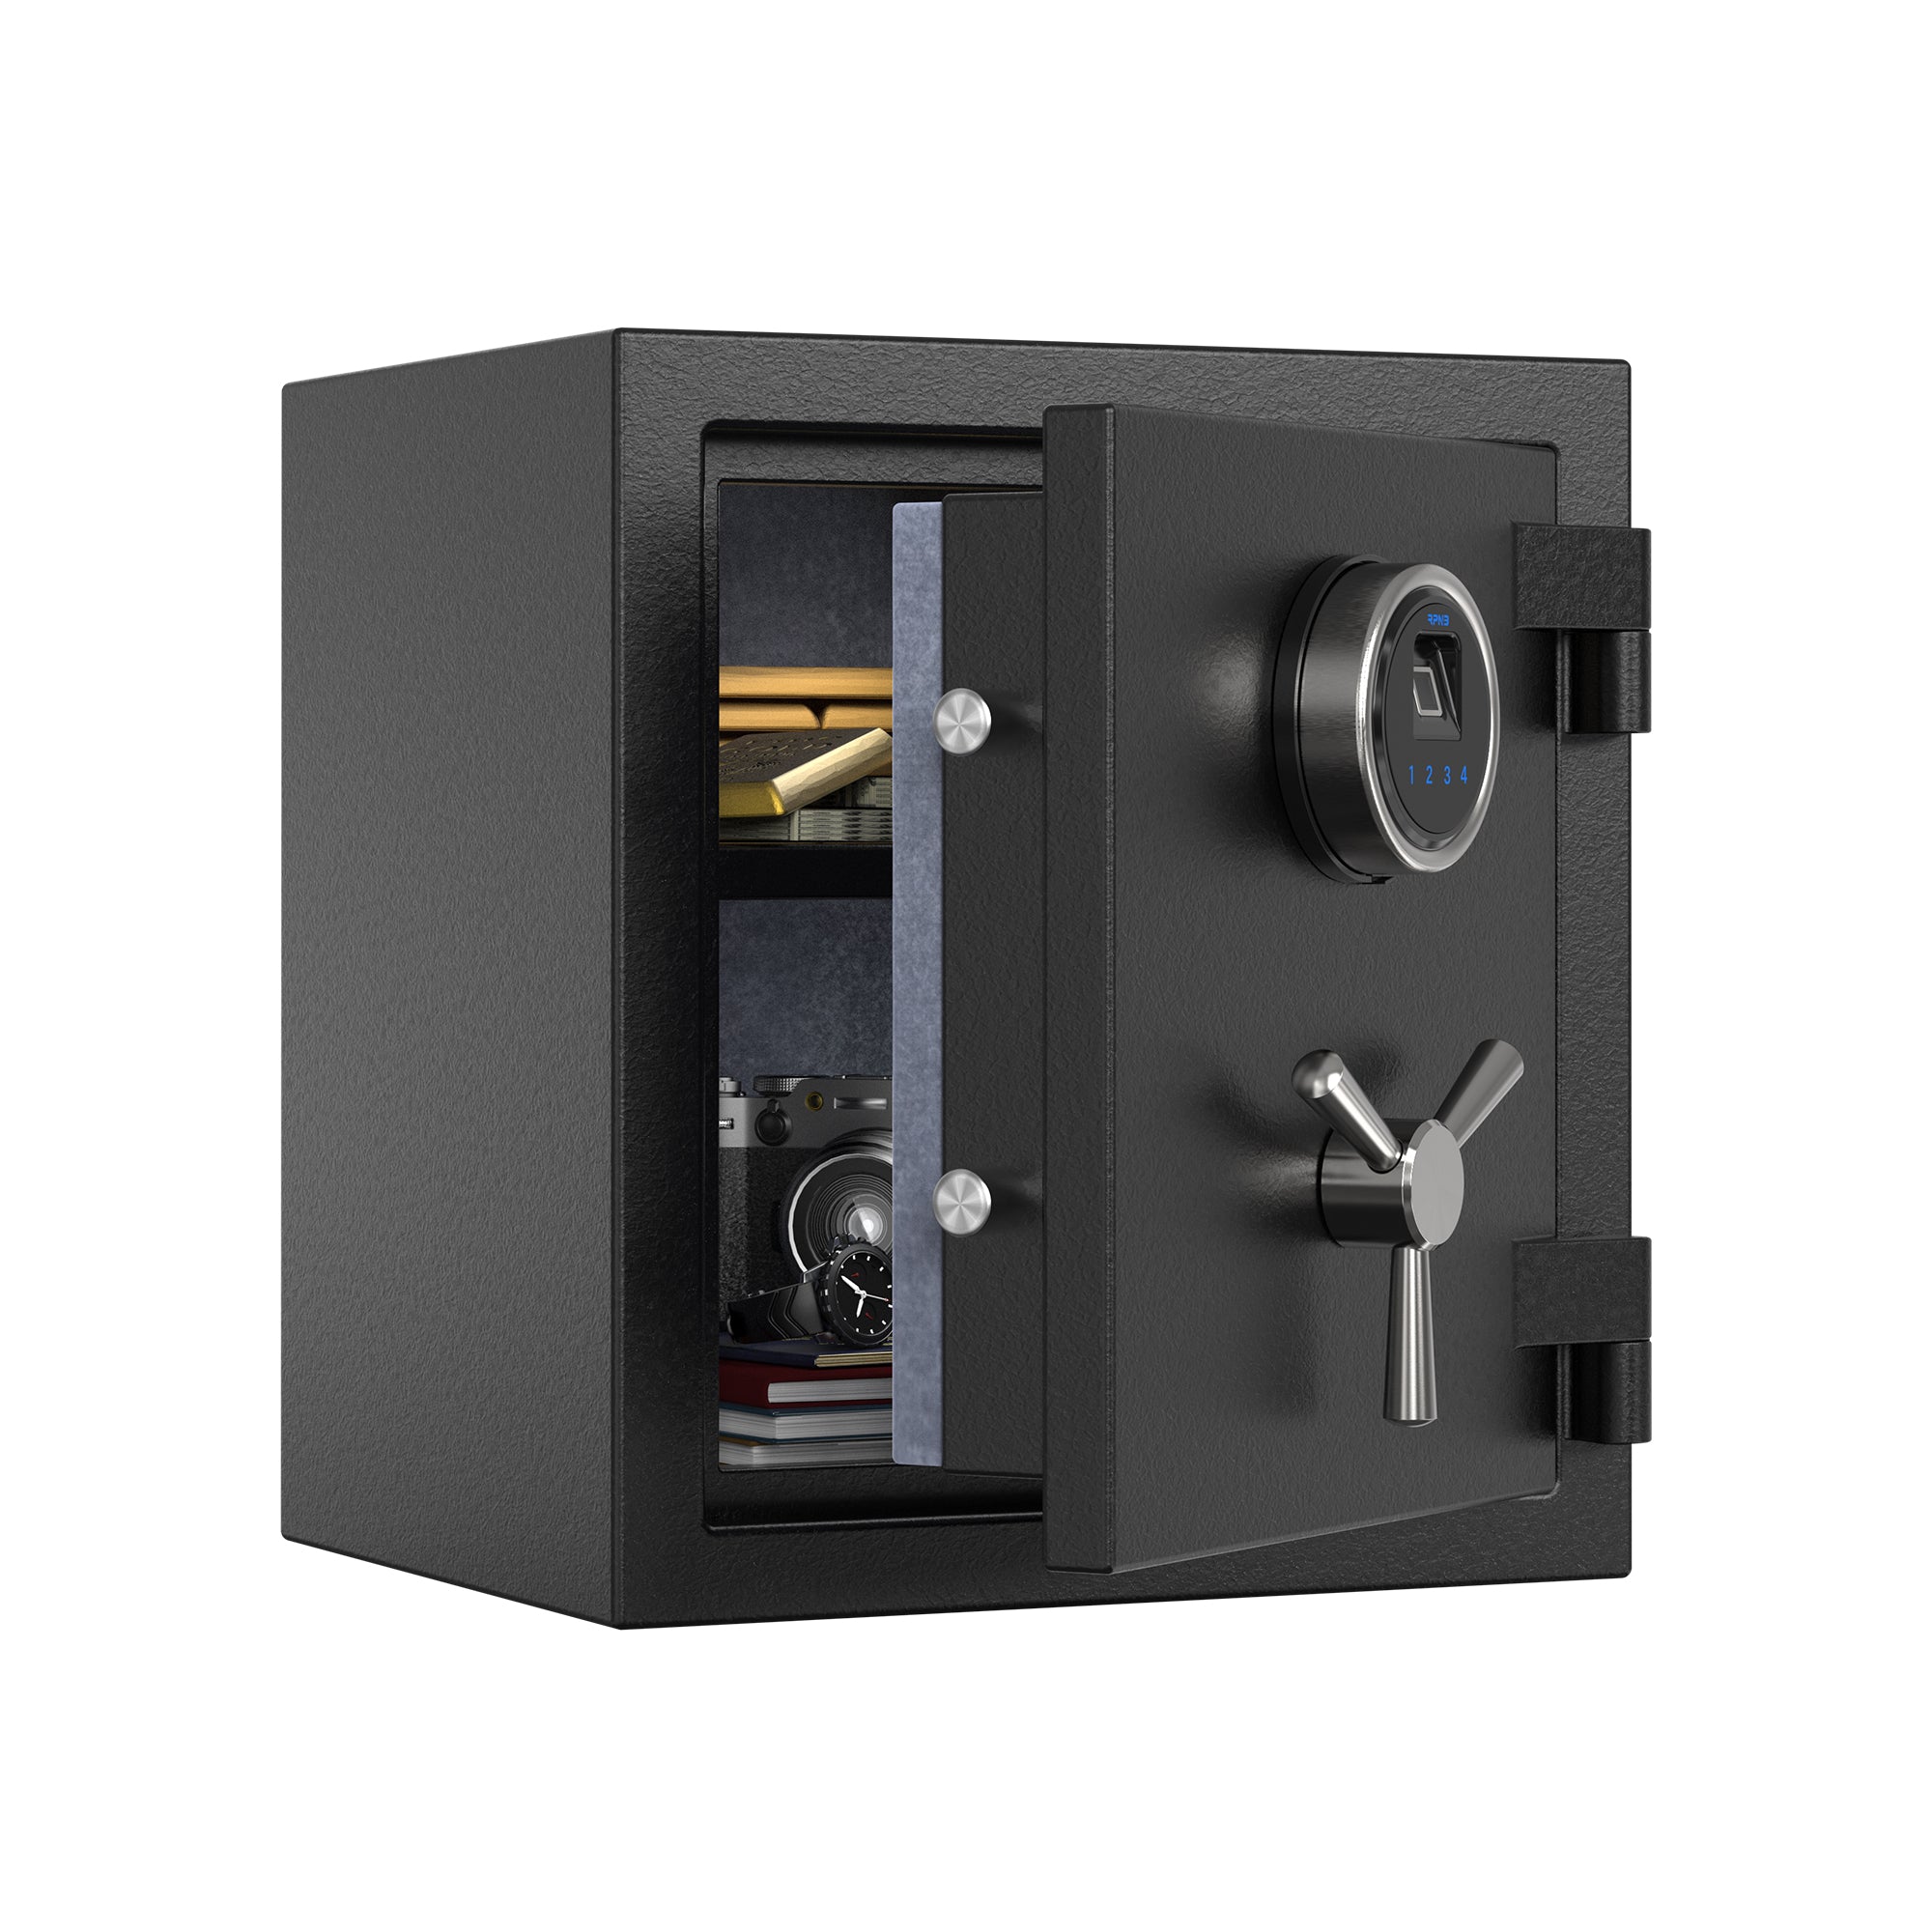 RPNB RPFS40 Deluxe Biometric Fireproof Safe with Touch Screen Keypad